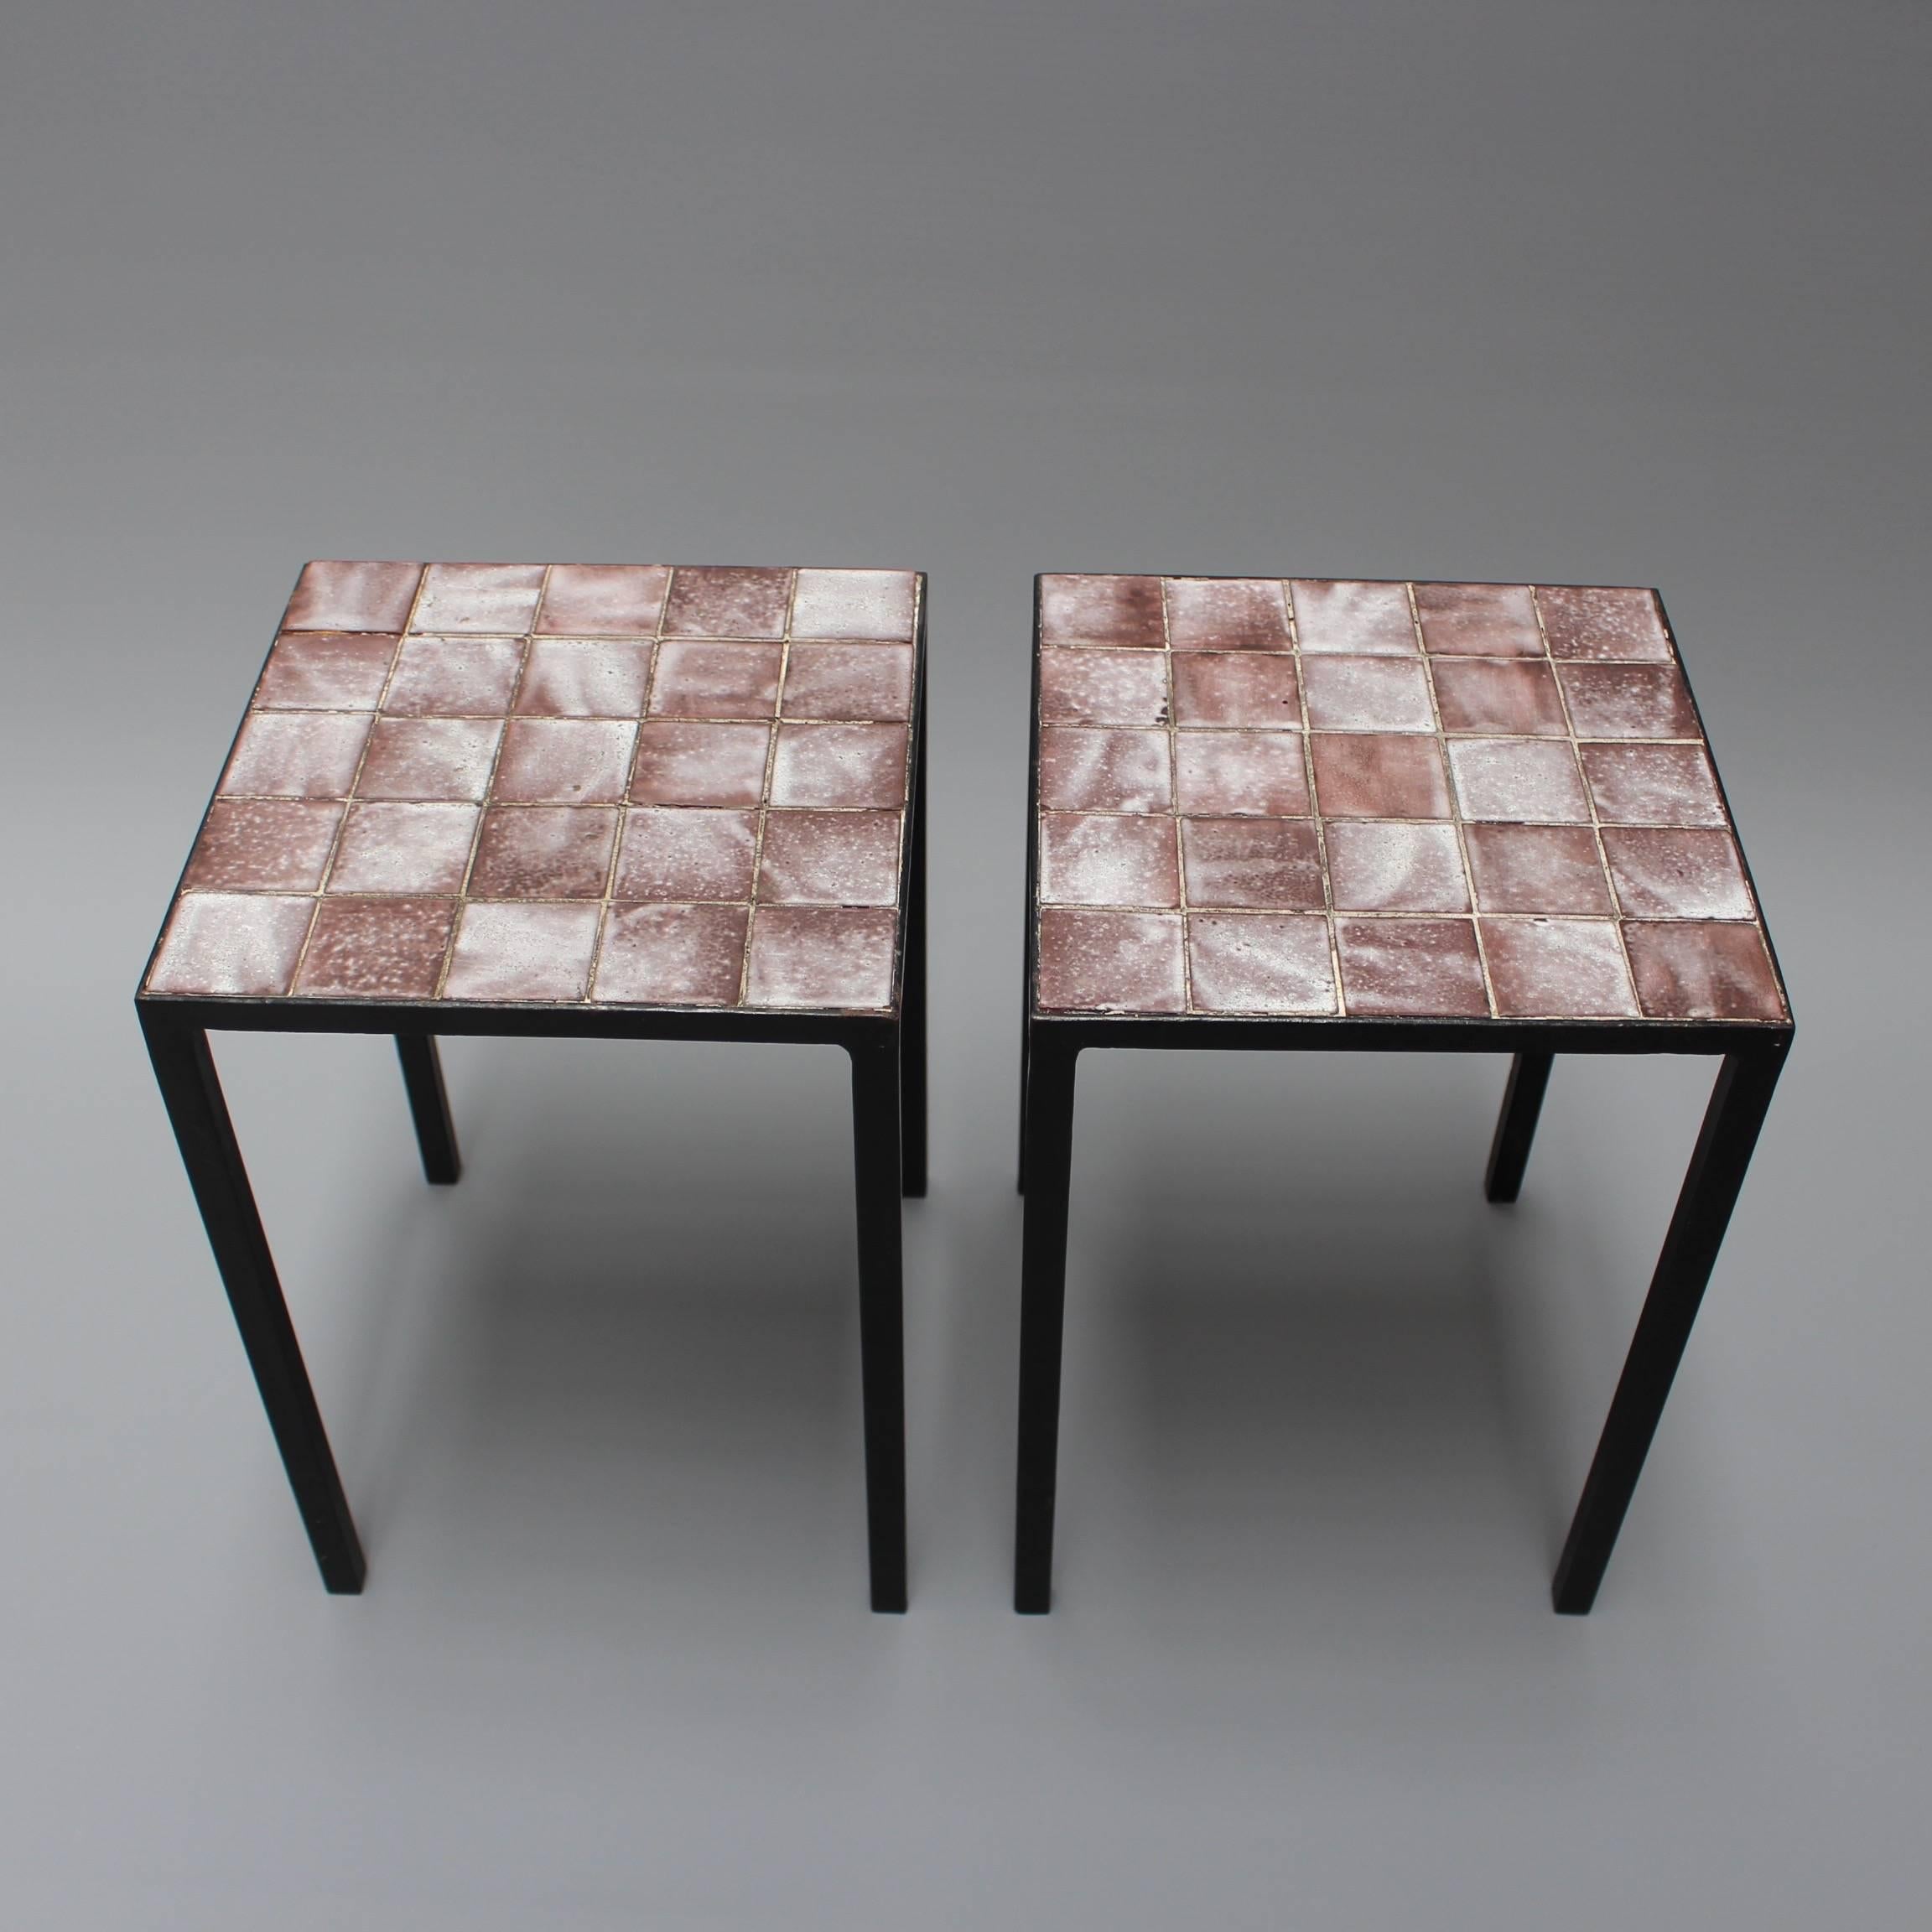 Set of two side tables perfectly simple and simply perfect. Ceramic tiles sit upon a frame and black metal legs in elegant symmetry. The tiles are of a brownish-purple base colour dusted with a textural white glaze - some are primarily